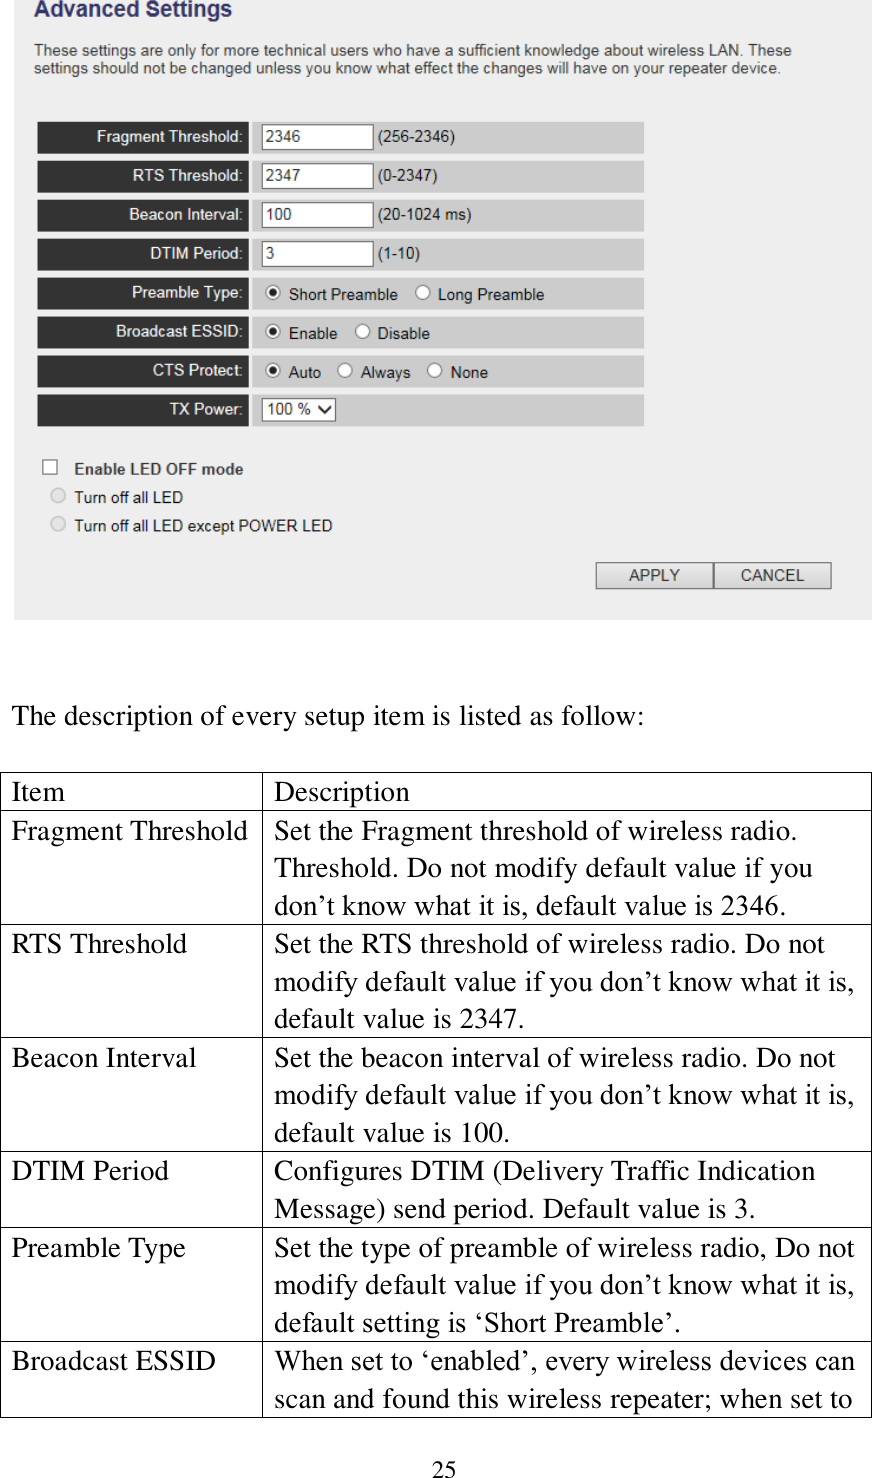 25    The description of every setup item is listed as follow:  Item Description Fragment Threshold Set the Fragment threshold of wireless radio. Threshold. Do not modify default value if you don’t know what it is, default value is 2346. RTS Threshold Set the RTS threshold of wireless radio. Do not modify default value if you don’t know what it is, default value is 2347. Beacon Interval Set the beacon interval of wireless radio. Do not modify default value if you don’t know what it is, default value is 100. DTIM Period Configures DTIM (Delivery Traffic Indication Message) send period. Default value is 3. Preamble Type Set the type of preamble of wireless radio, Do not modify default value if you don’t know what it is, default setting is ‘Short Preamble’. Broadcast ESSID When set to ‘enabled’, every wireless devices can scan and found this wireless repeater; when set to 